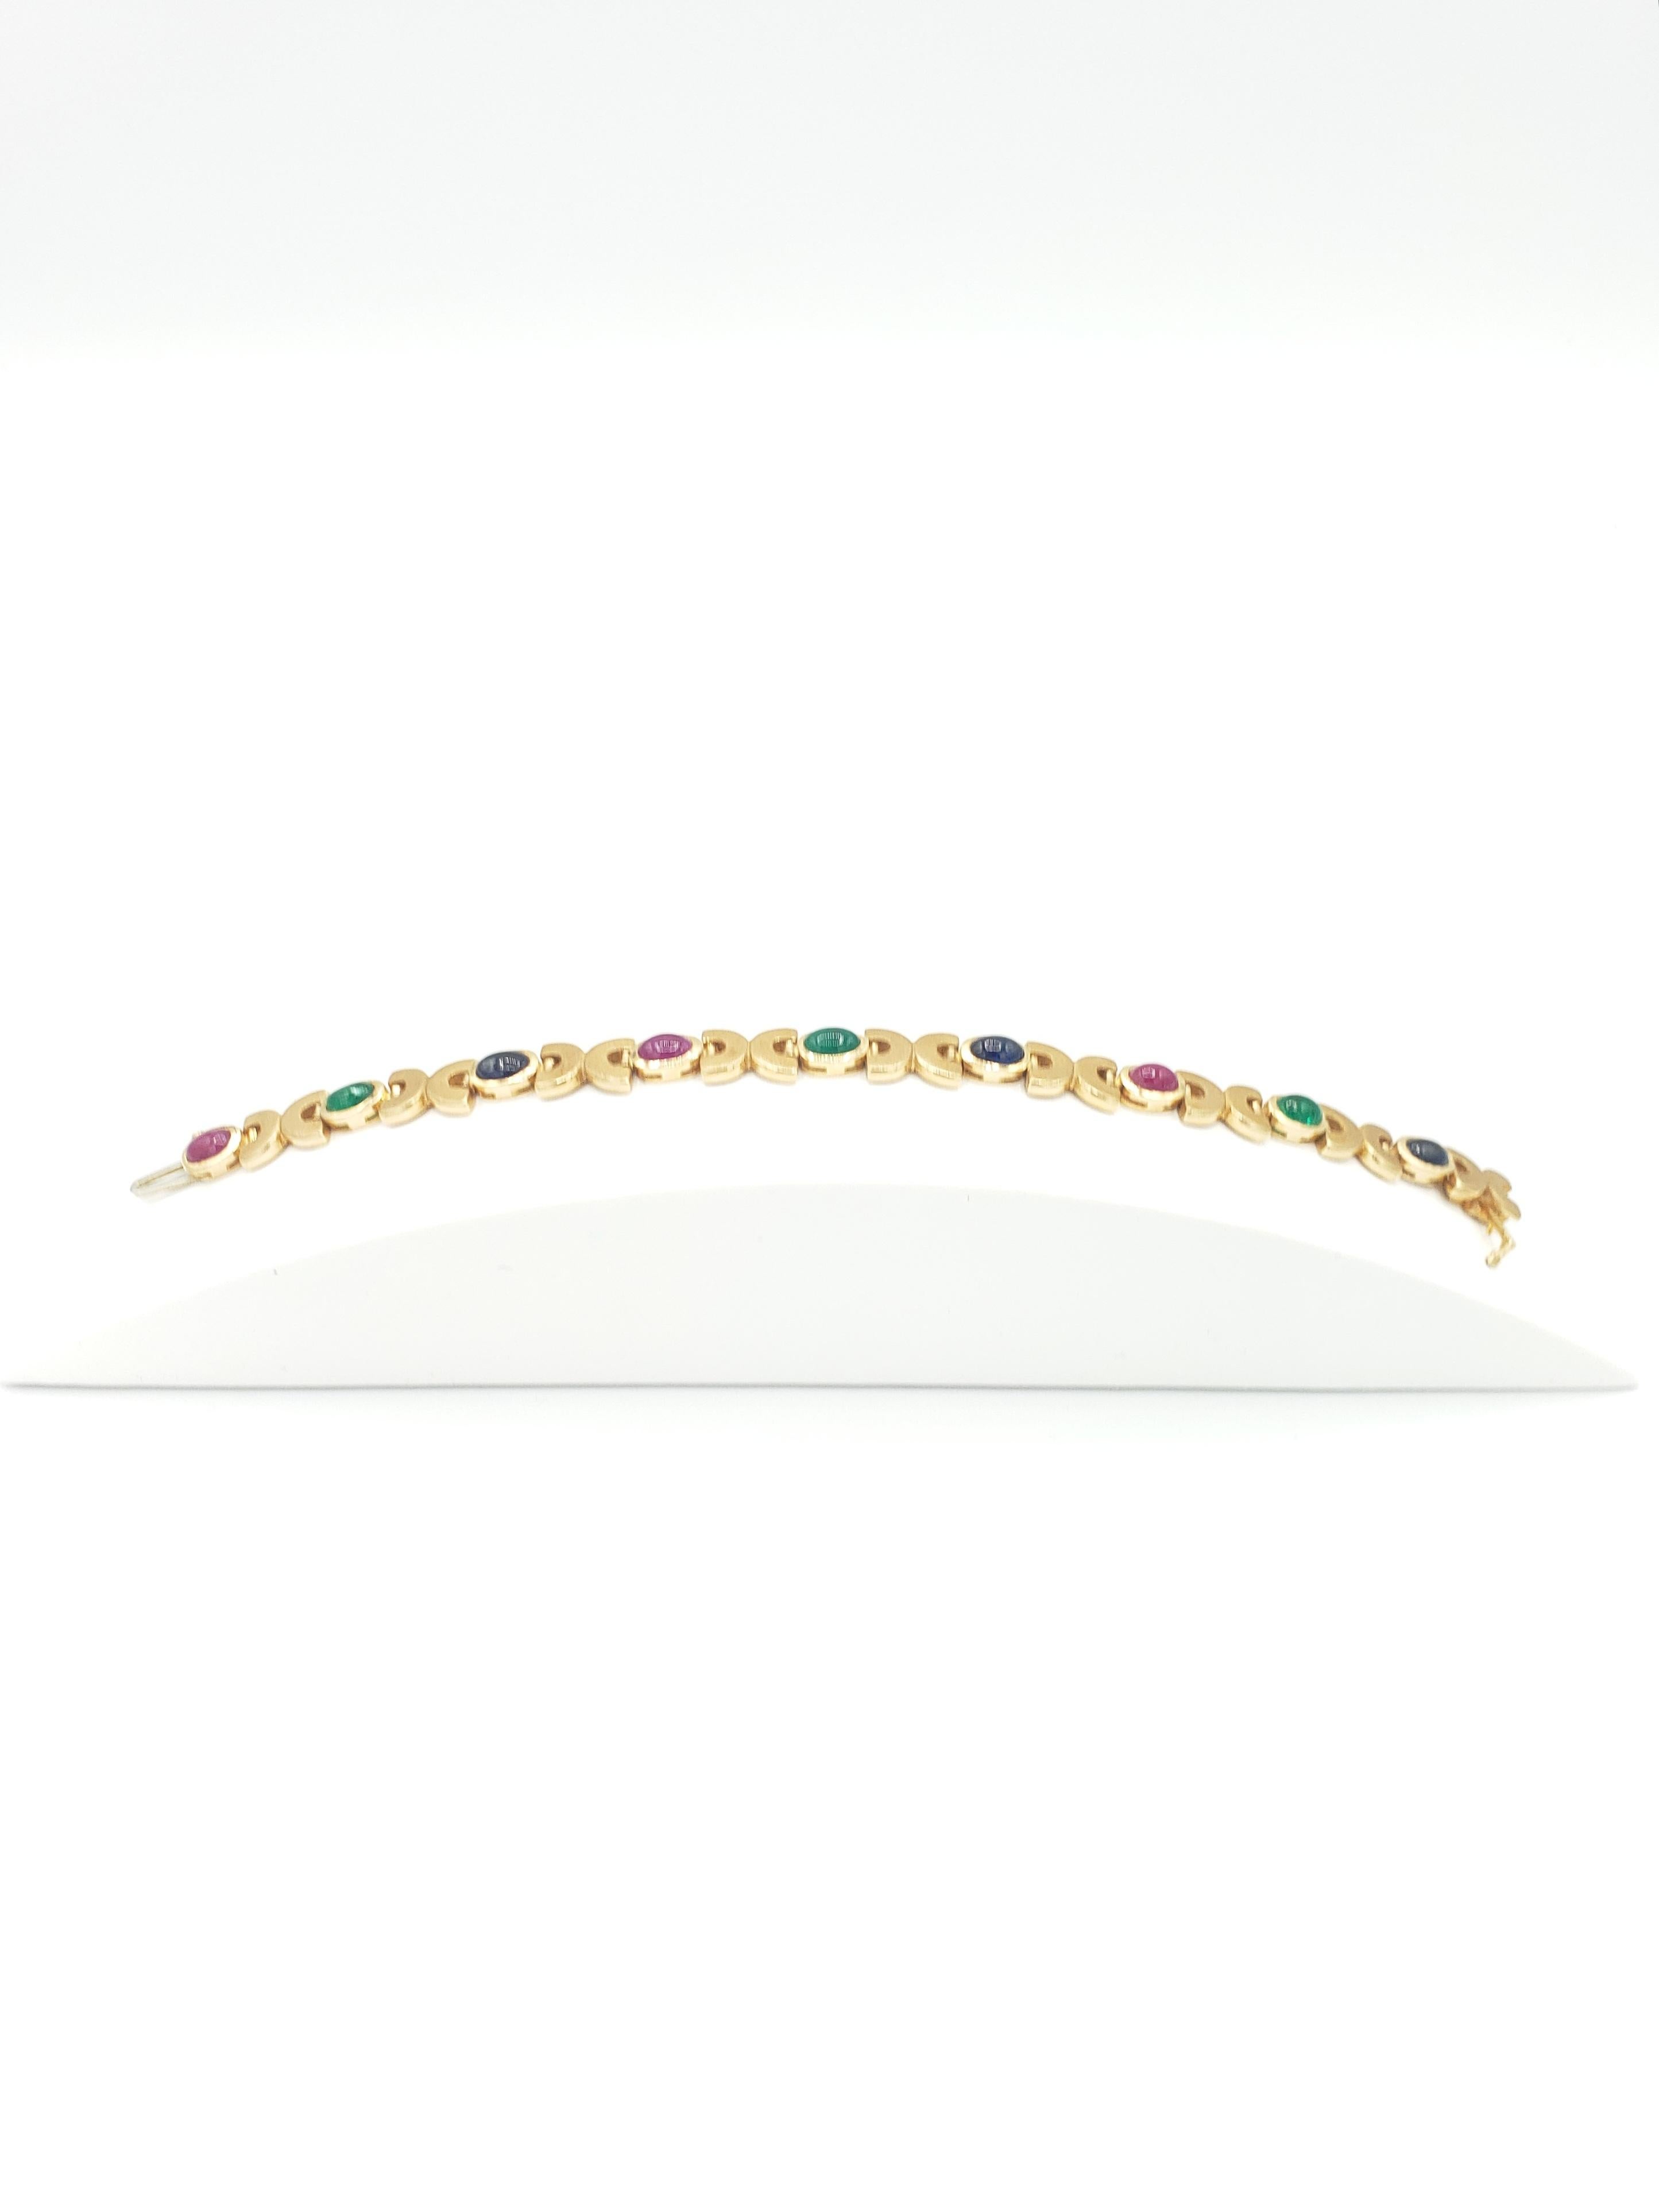 Oval Cut NEW Natural Ruby, Sapphire, Emerald Cabochon Bracelet in 14k Yellow Gold New For Sale